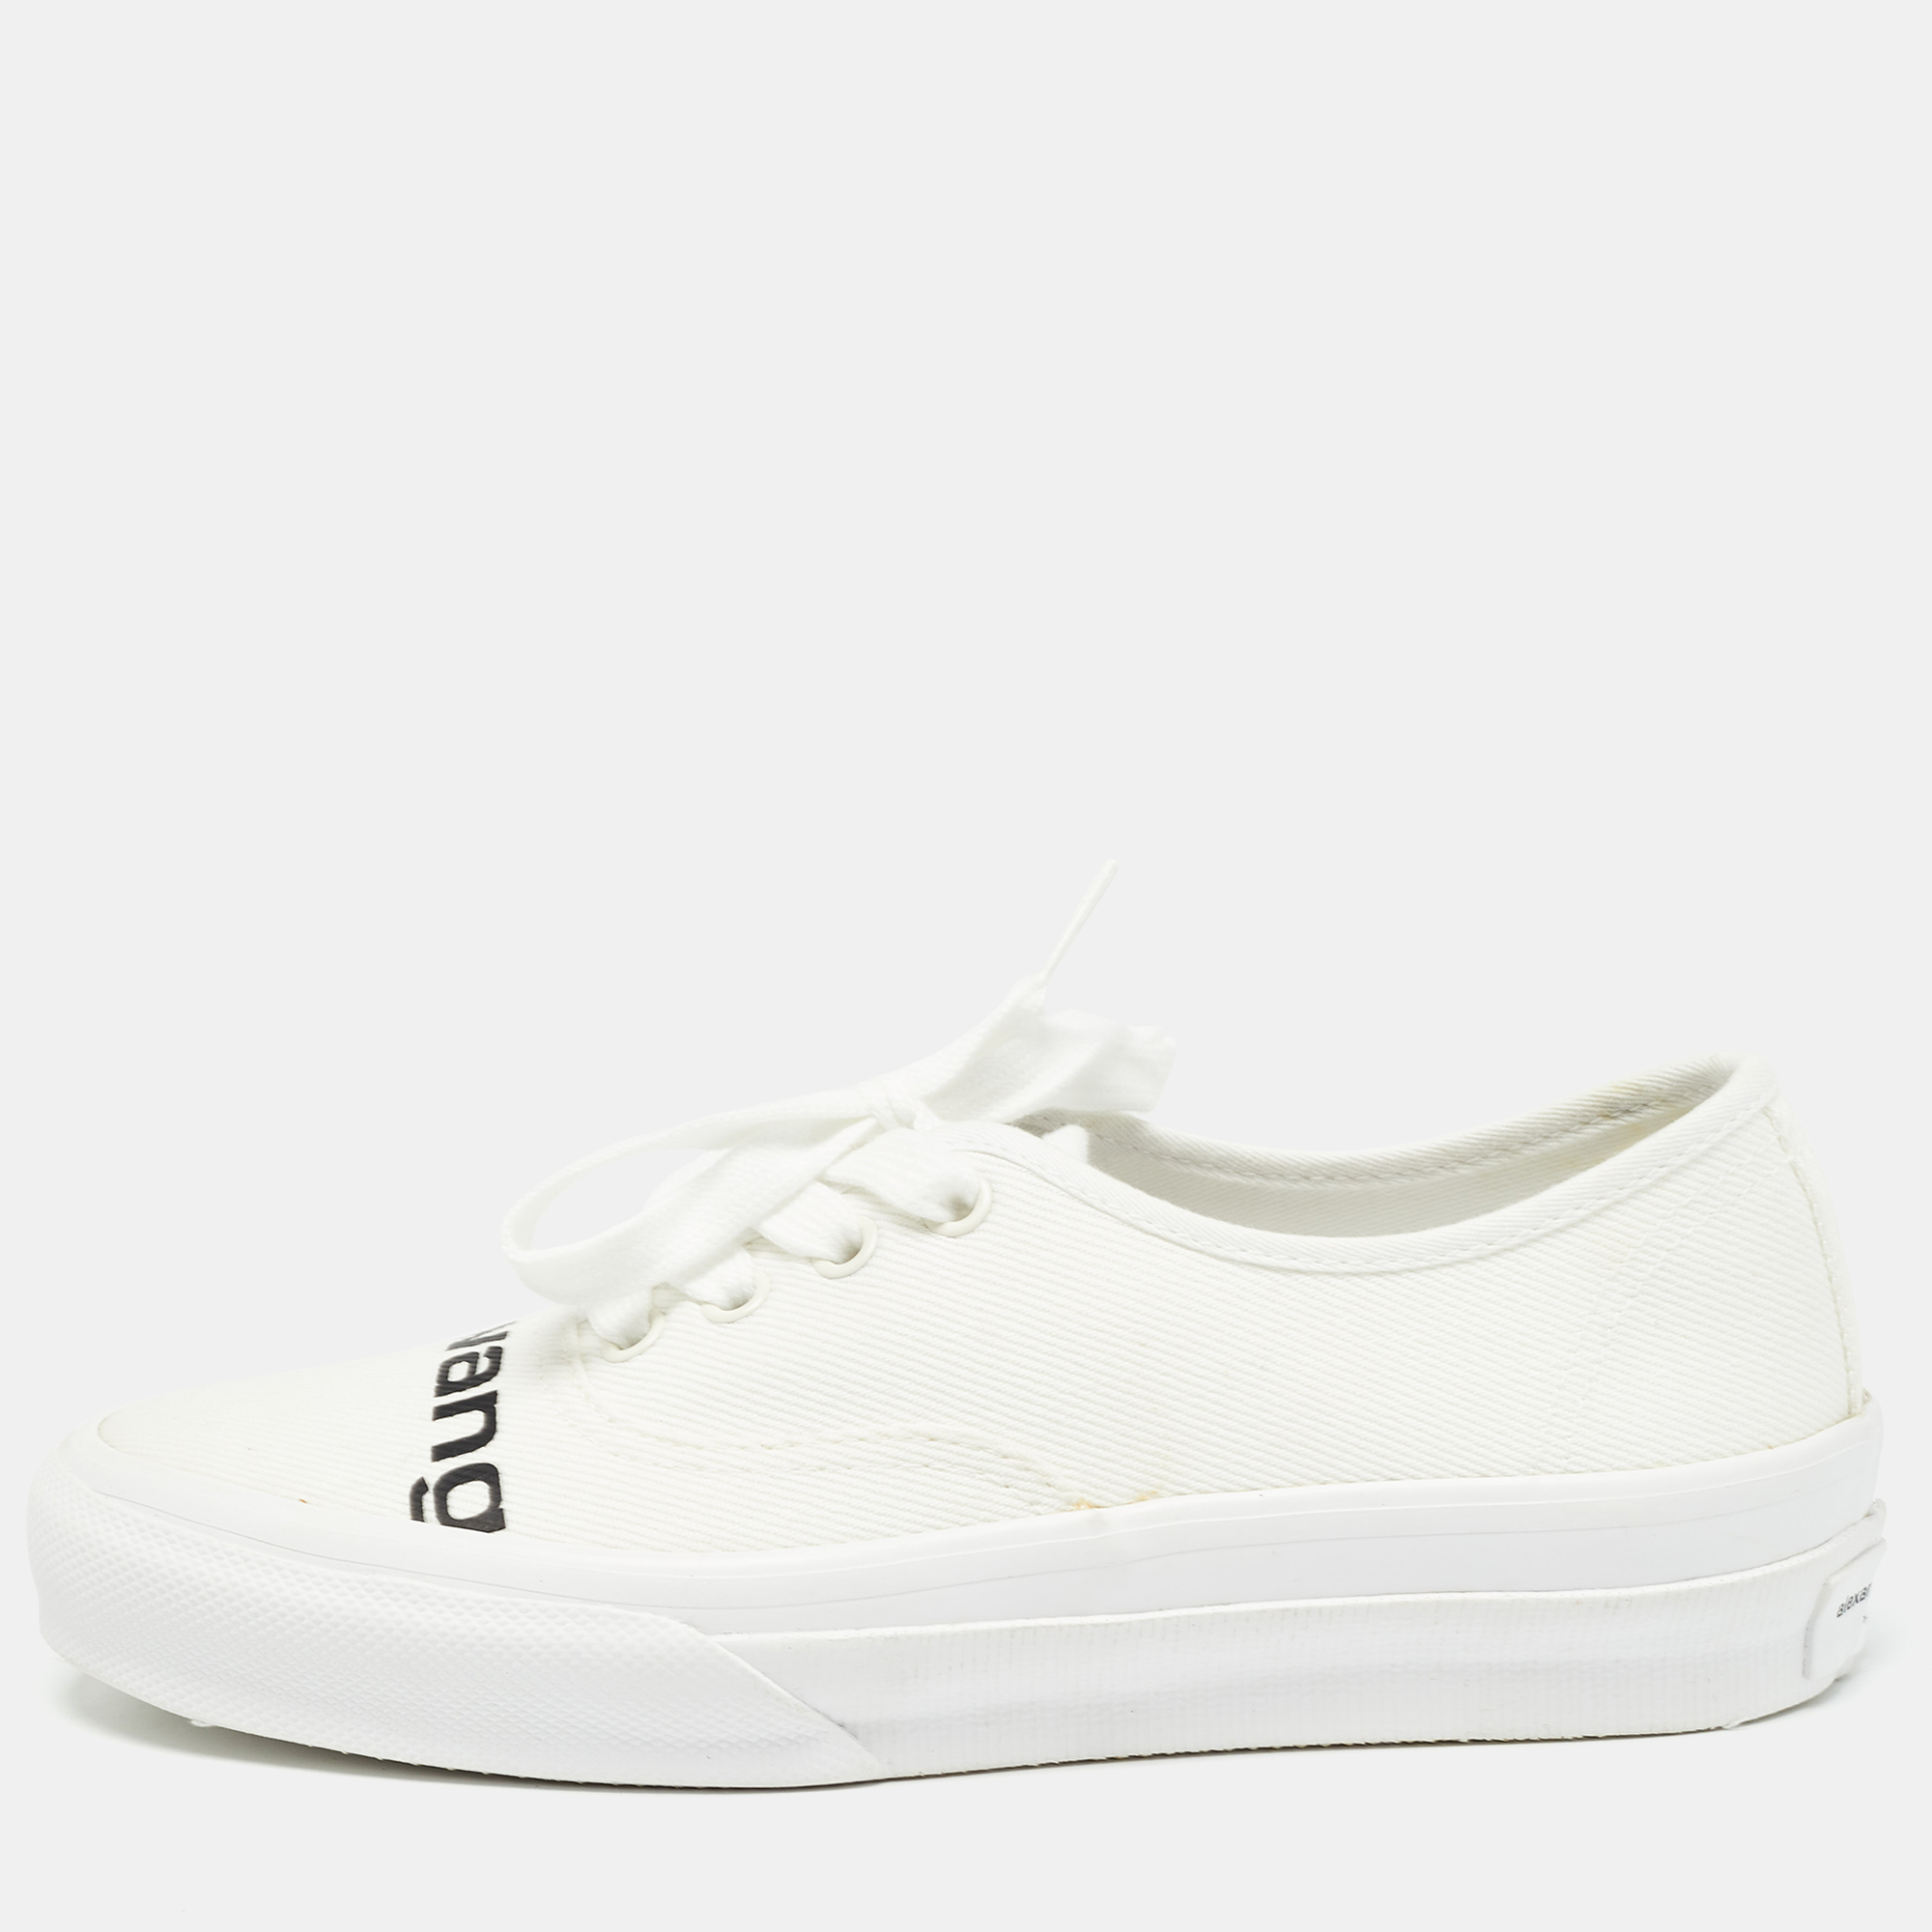 Pre-owned Alexander Wang White Canvas Dropout Sneakers Size 37.5